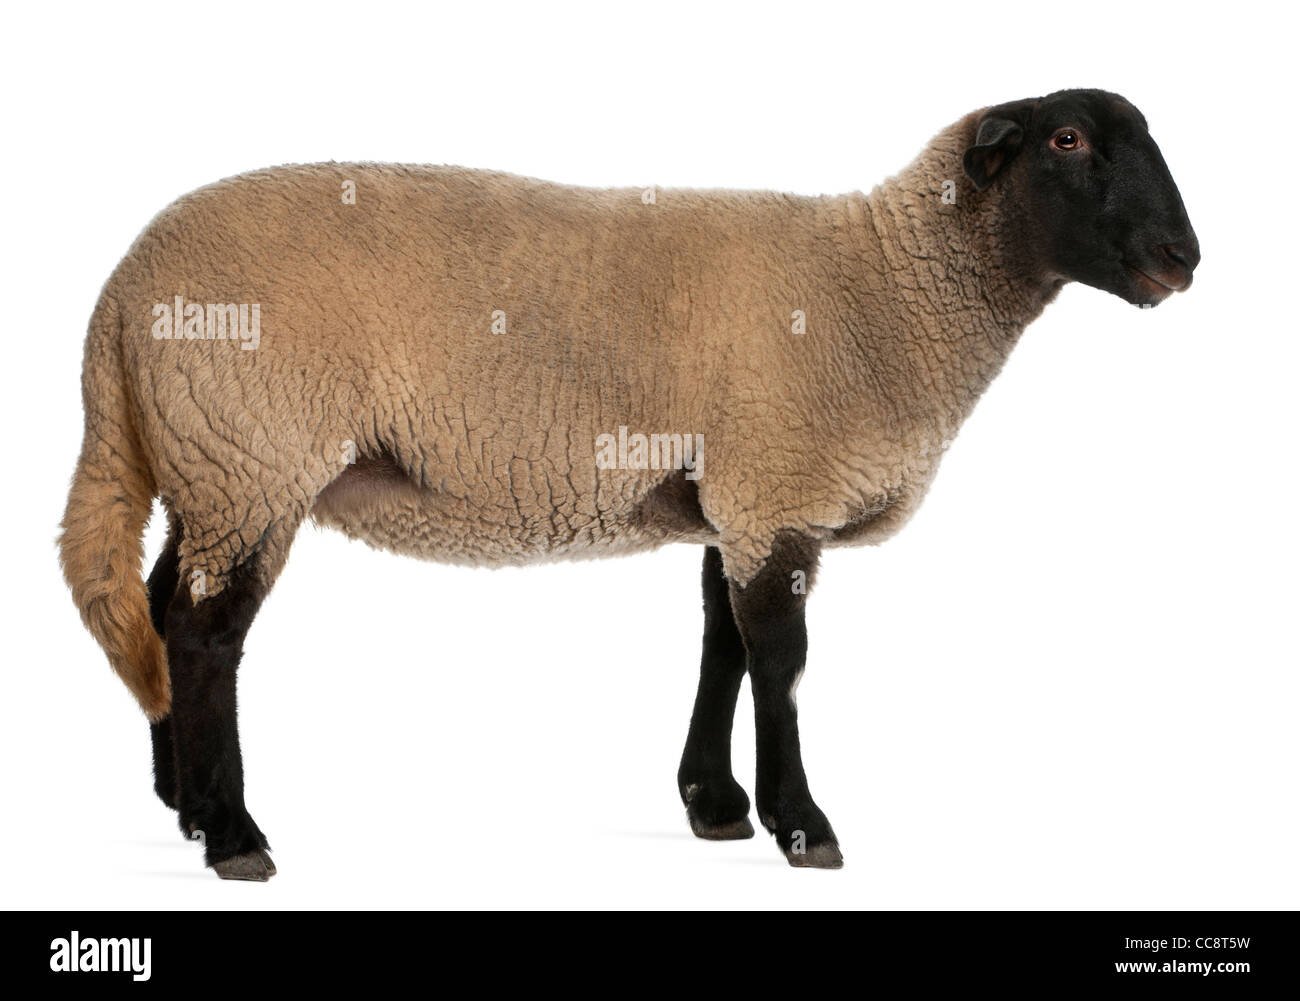 Female Suffolk sheep, Ovis aries, 2 years old, standing in front of white background Stock Photo